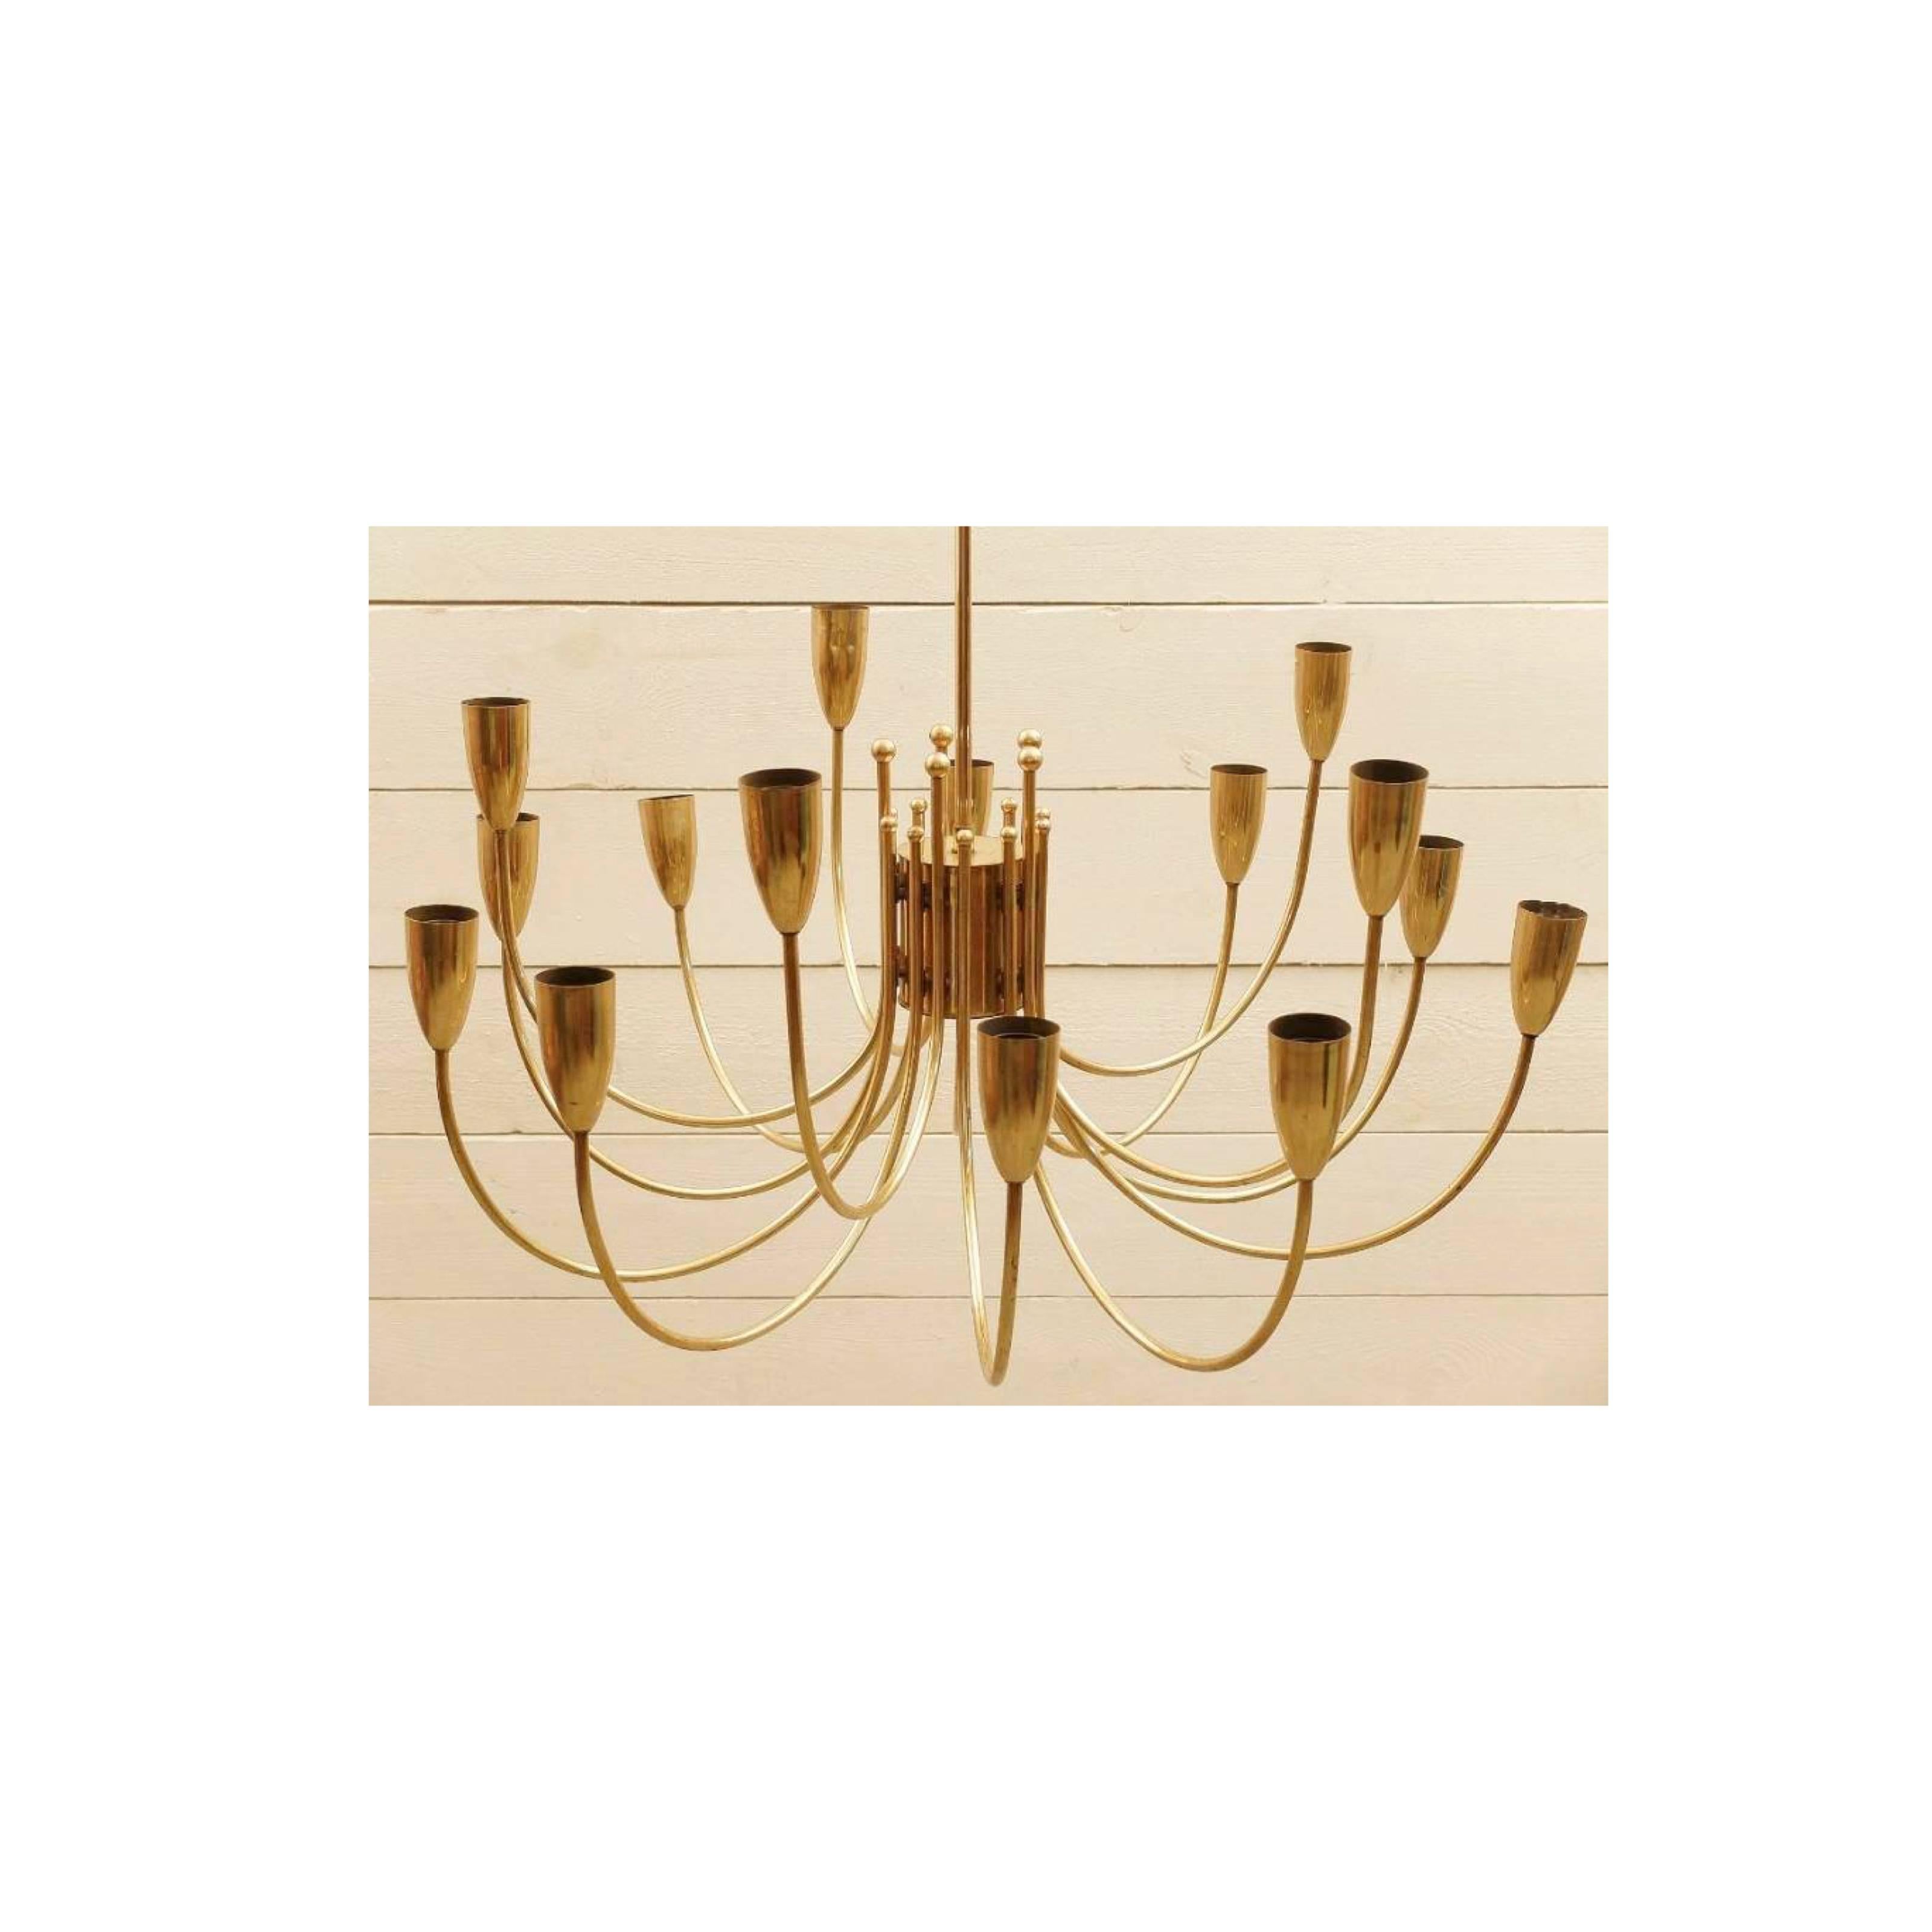 European One Pair of 1970s Brass Chandeliers For Sale